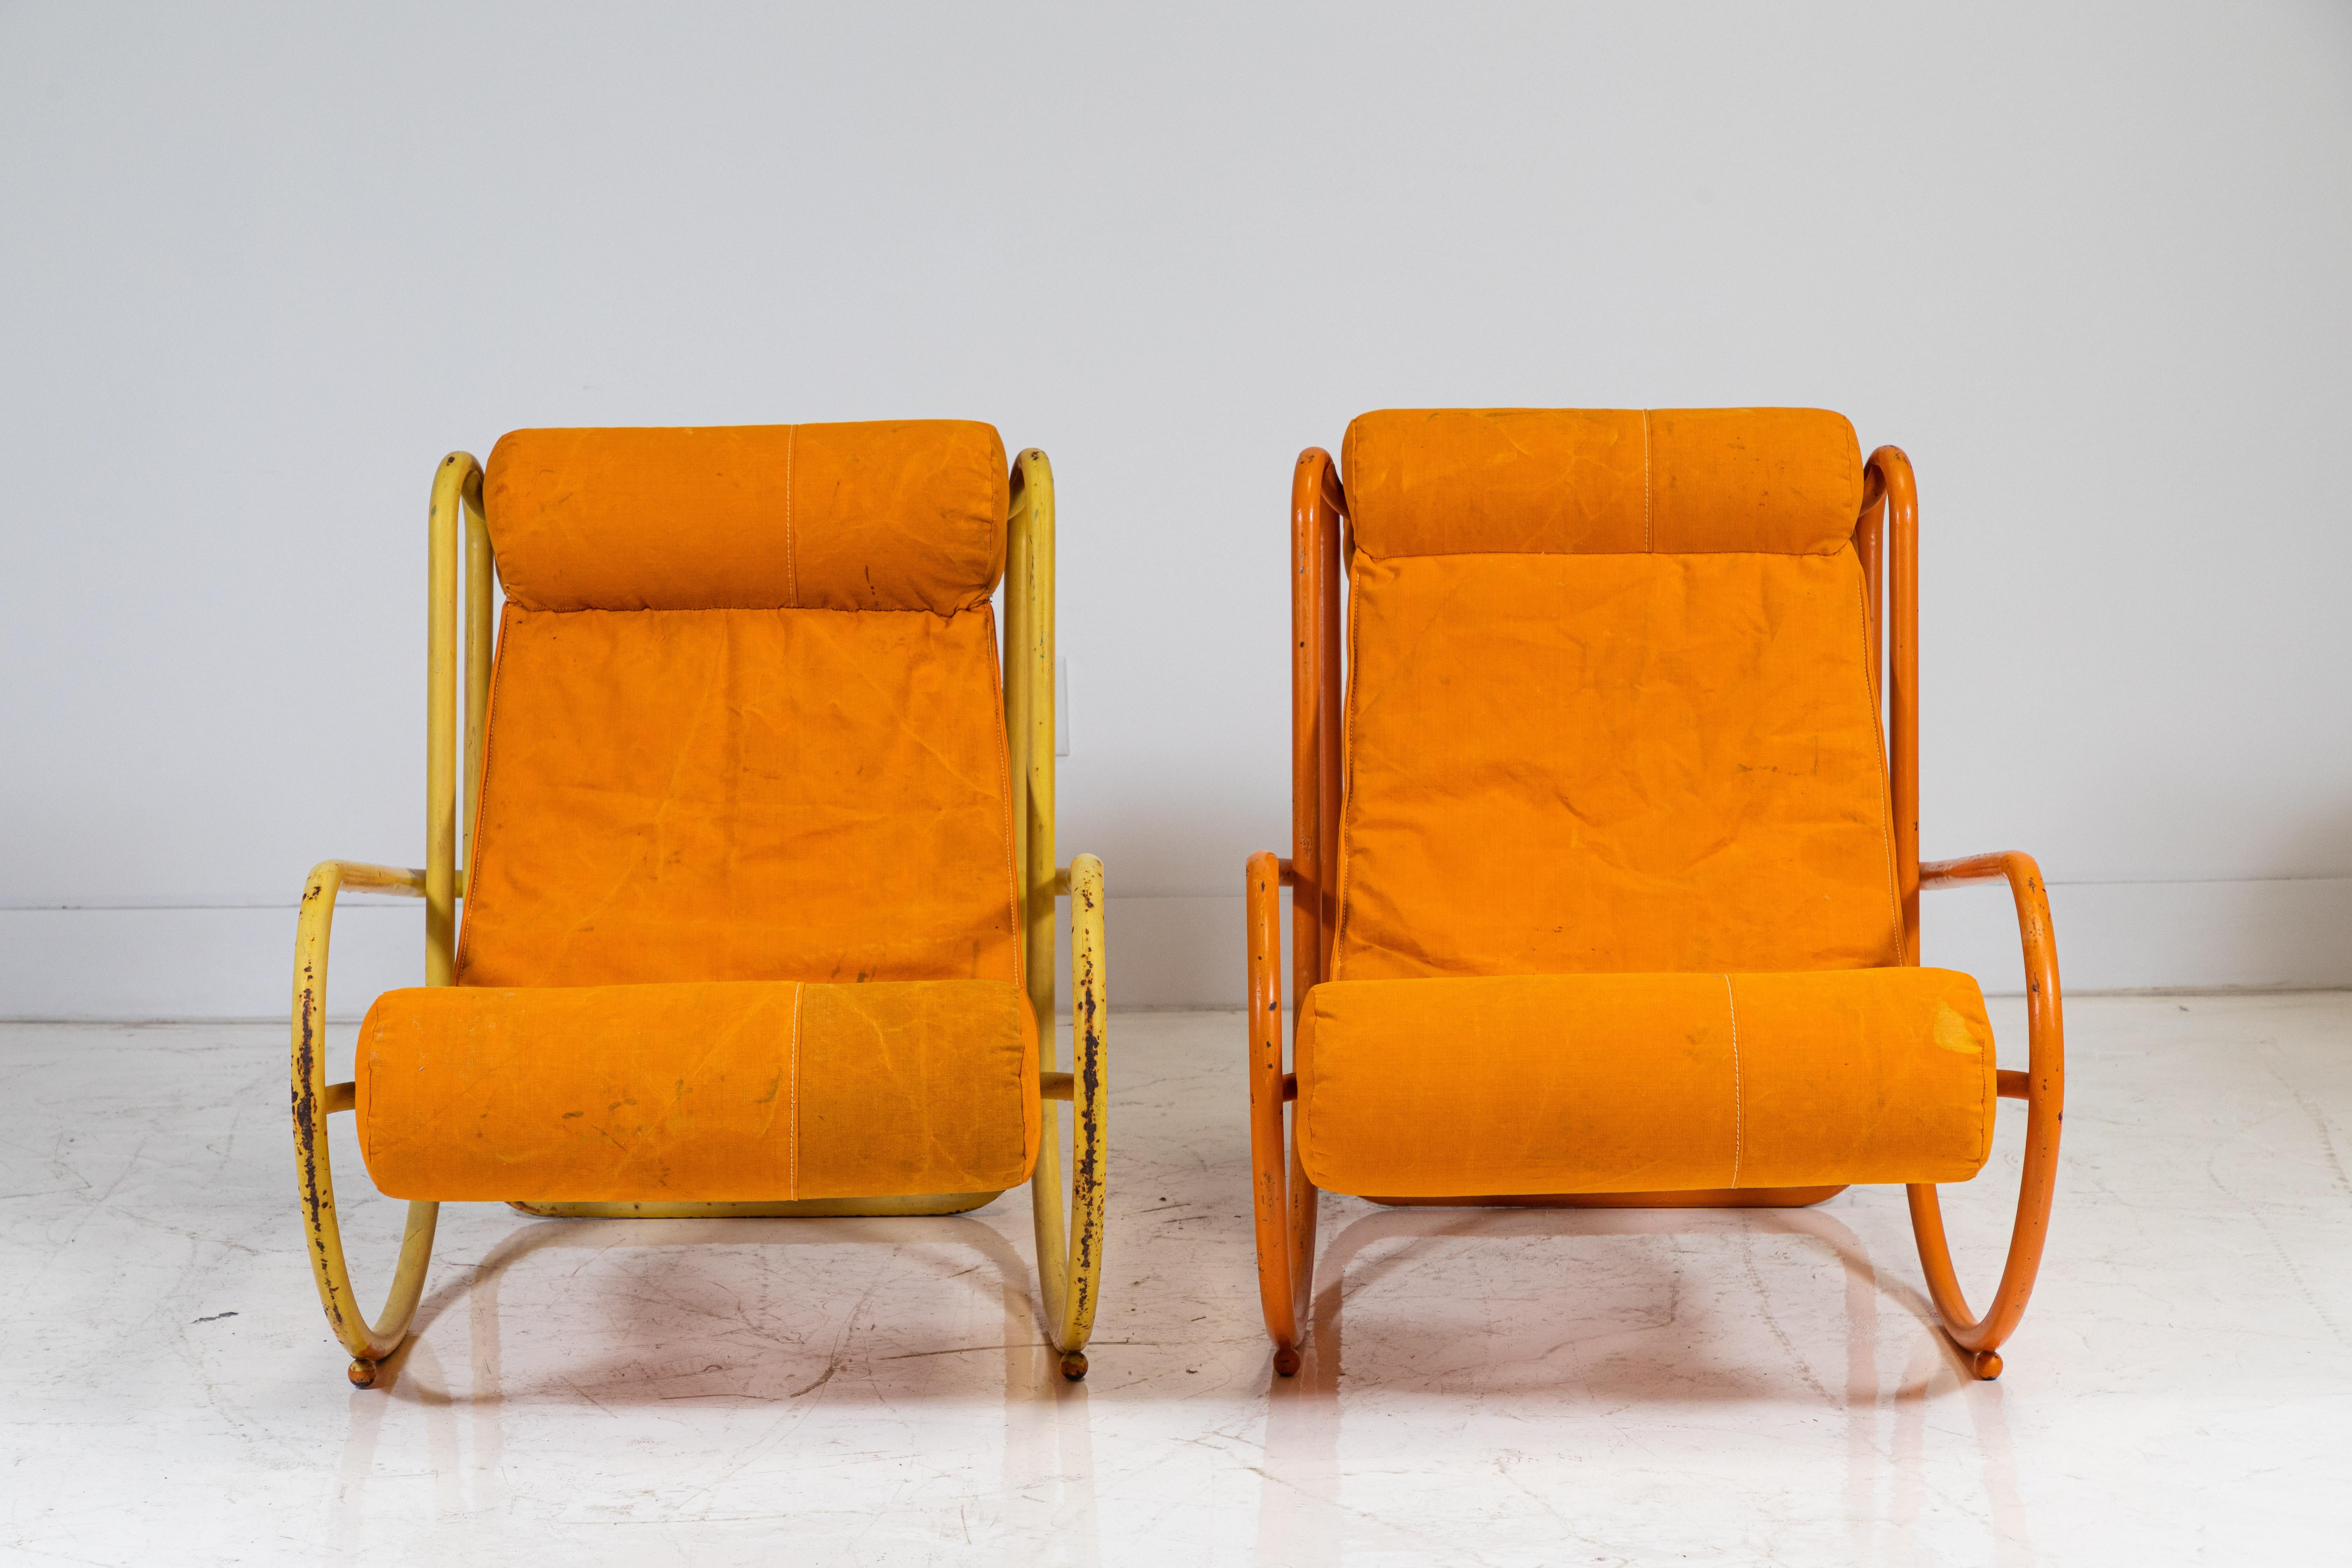 We let the original details stand out for the pair of Gae Aulenti Locus Solus lounge chairs. One metal chair is yellow and the other chair is orange the original paint is untouched and the patina adds a rustic earthy element. The chairs have been